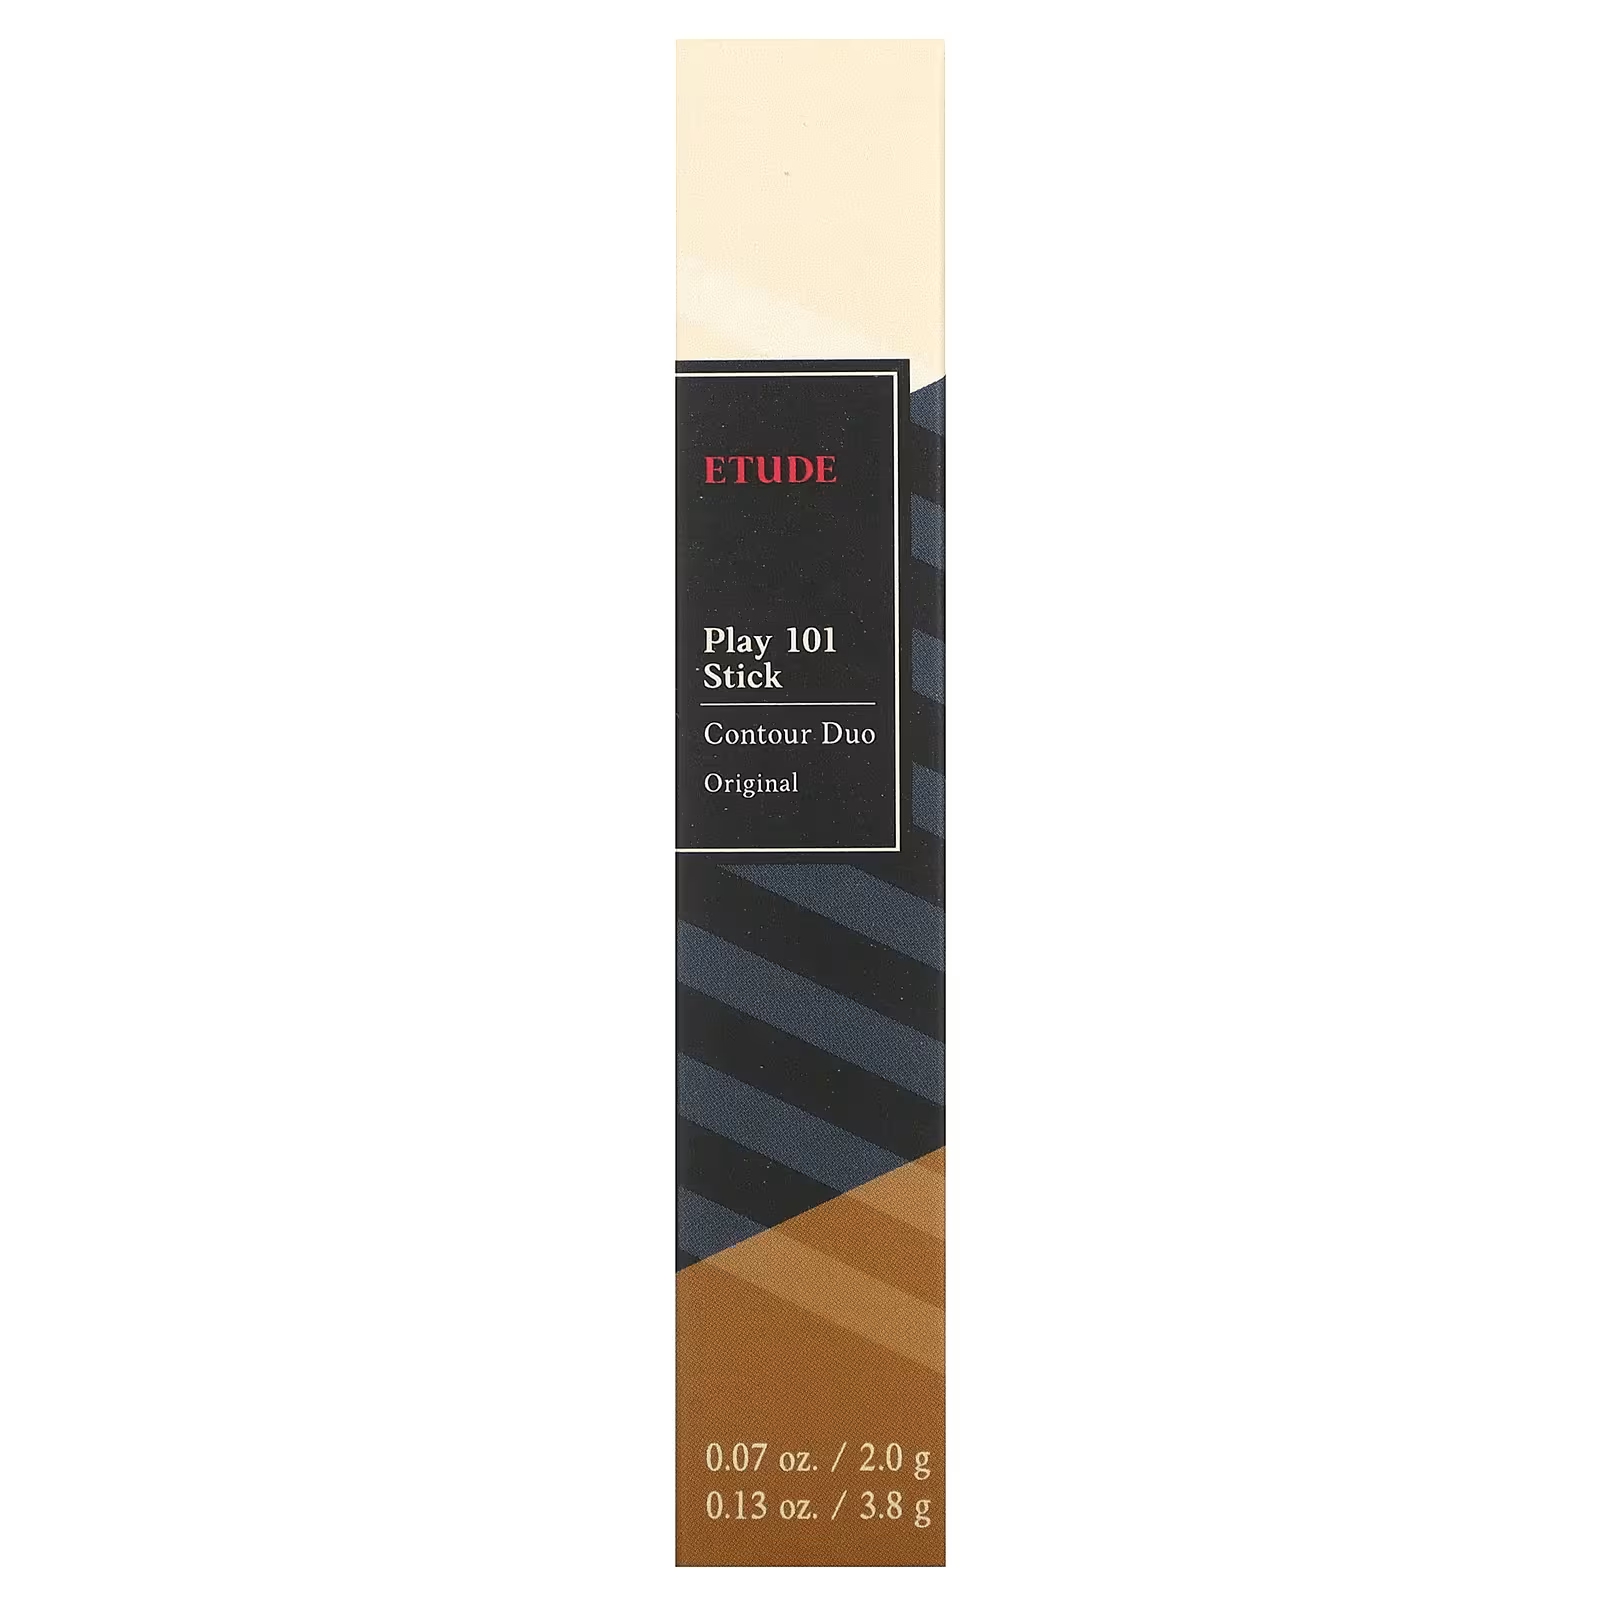 Etude Play 101 Stick Contour Duo №1, оригинал, 1 шт. lewis labs brewer s yeast 12 35 oz 350 g